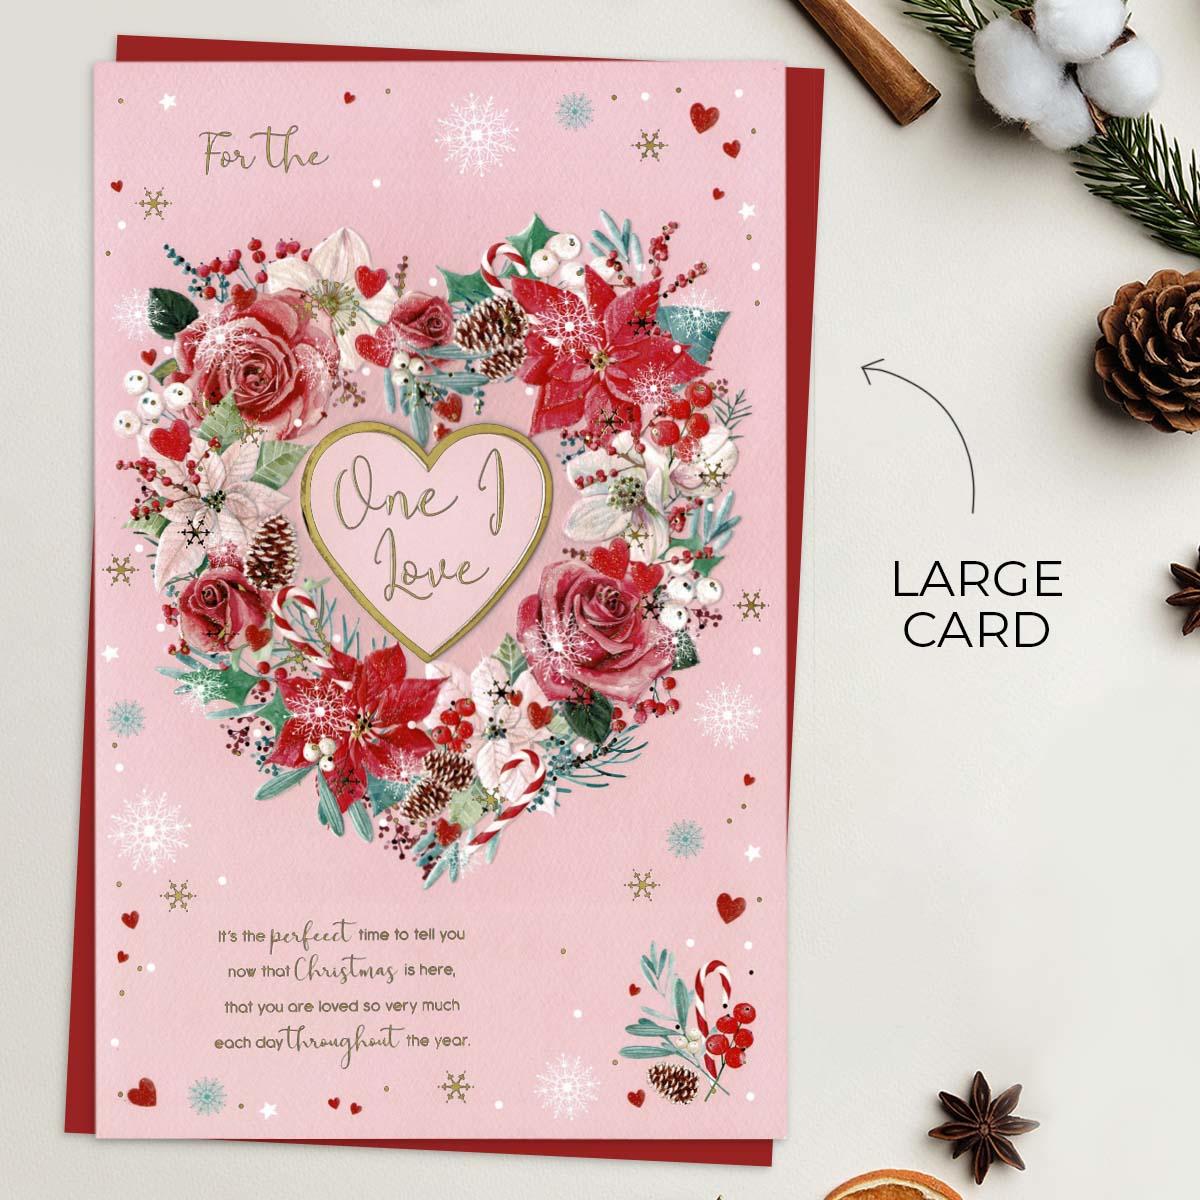 For The One I Love Christmas Heart Of Roses Large Card Front Image